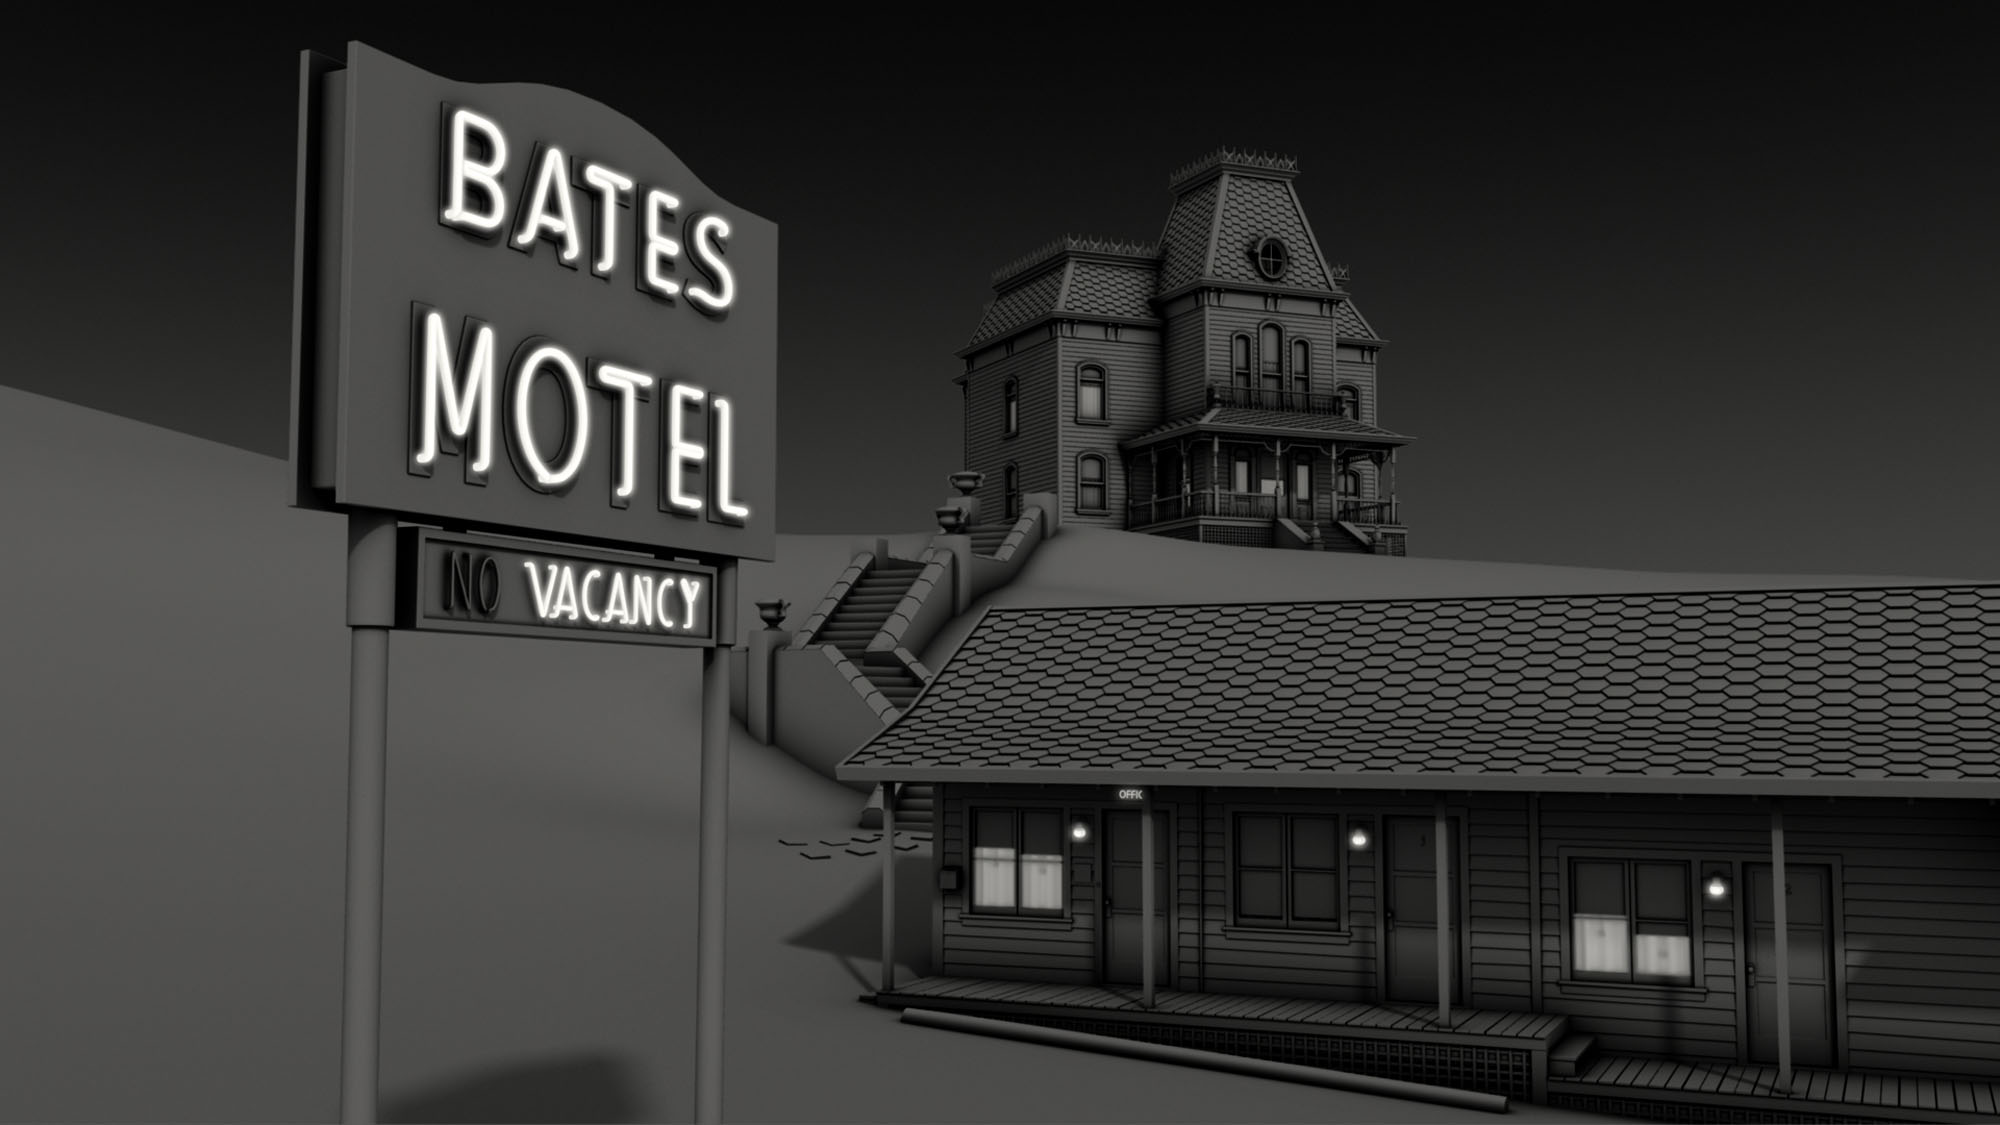 3D rendering of the bates motel and mansion